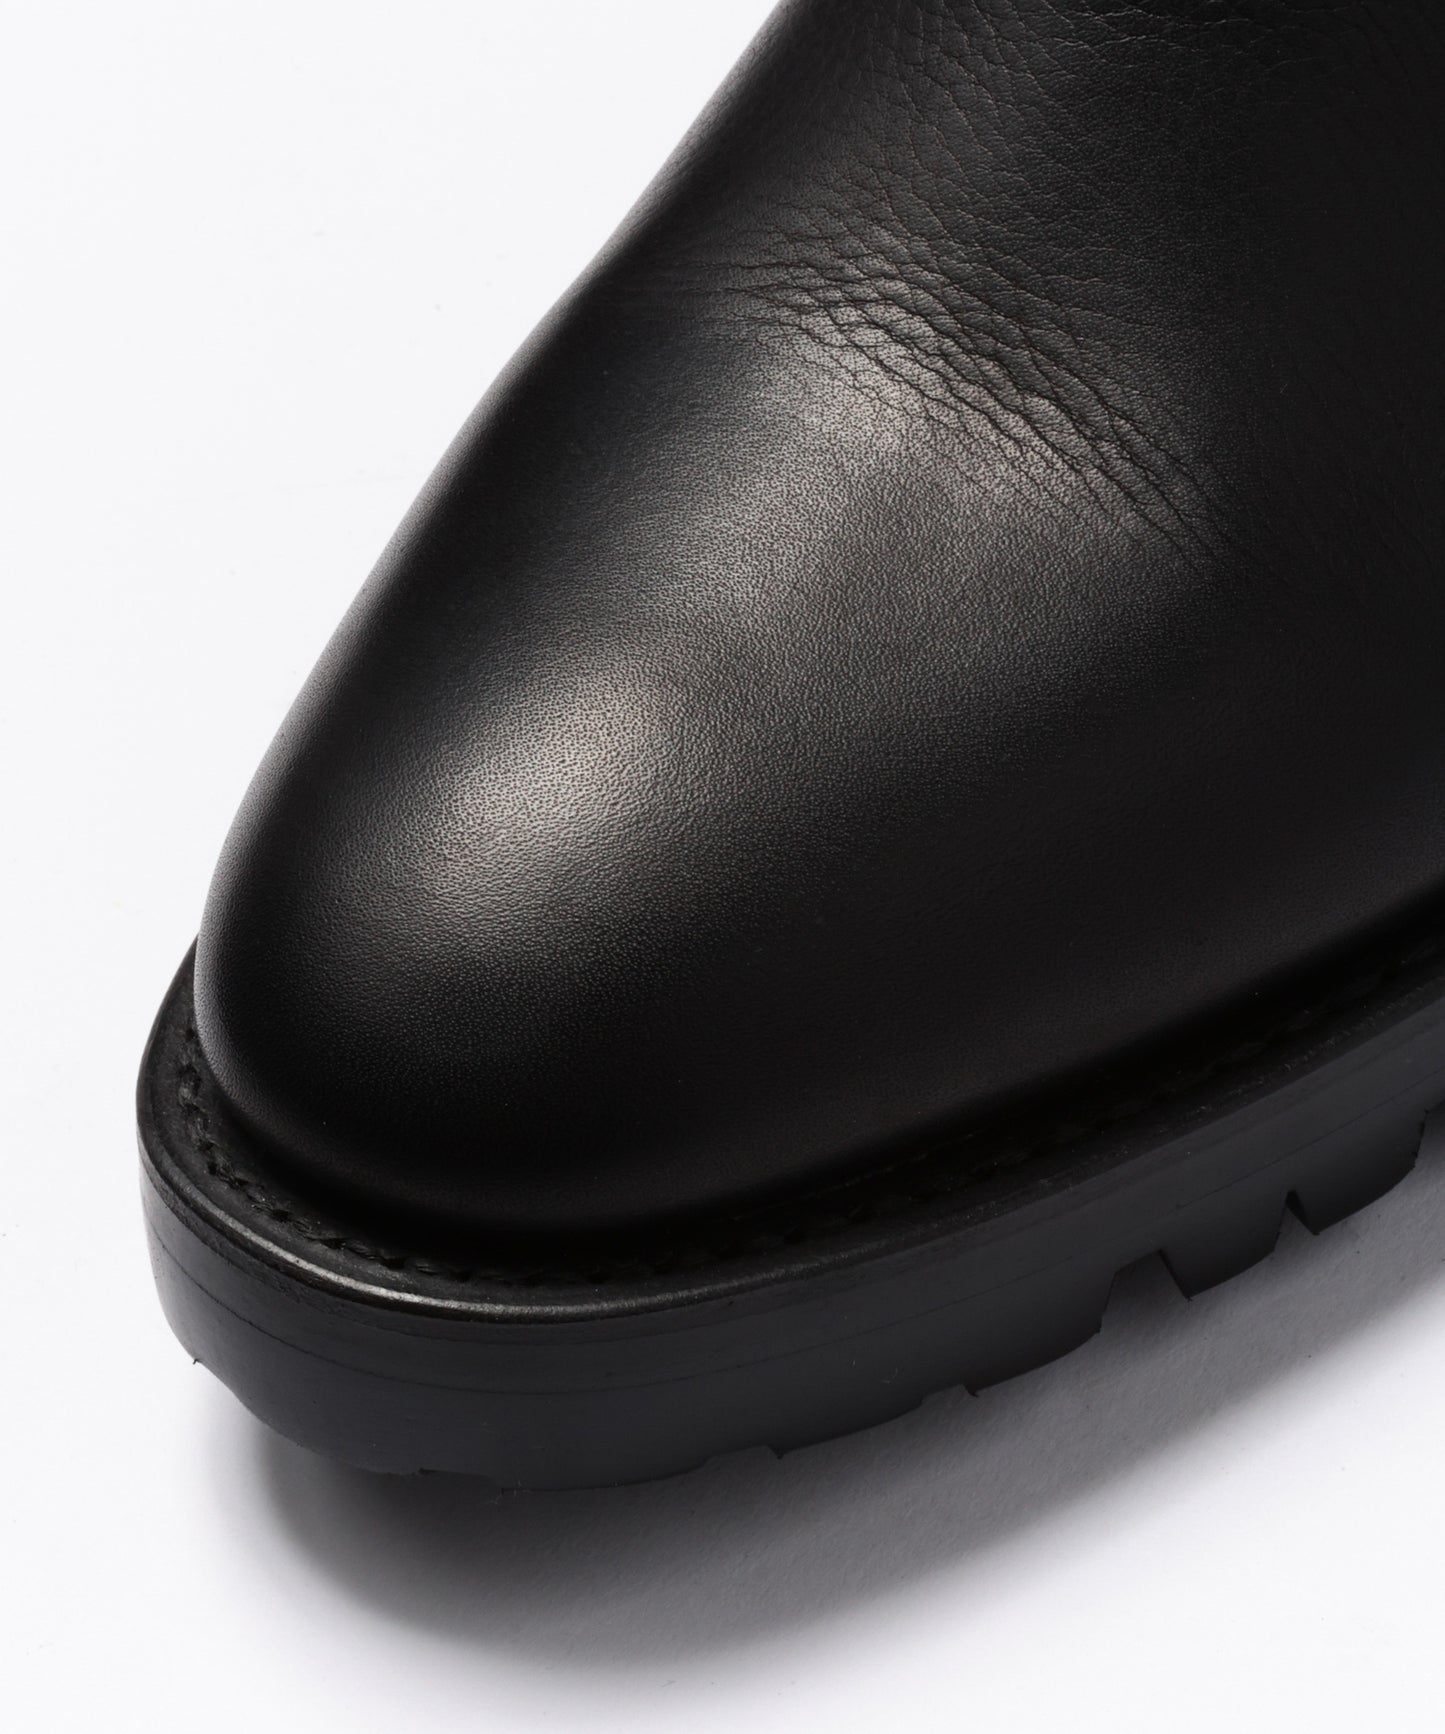 water proof shirink x vibram sole chelsea boots